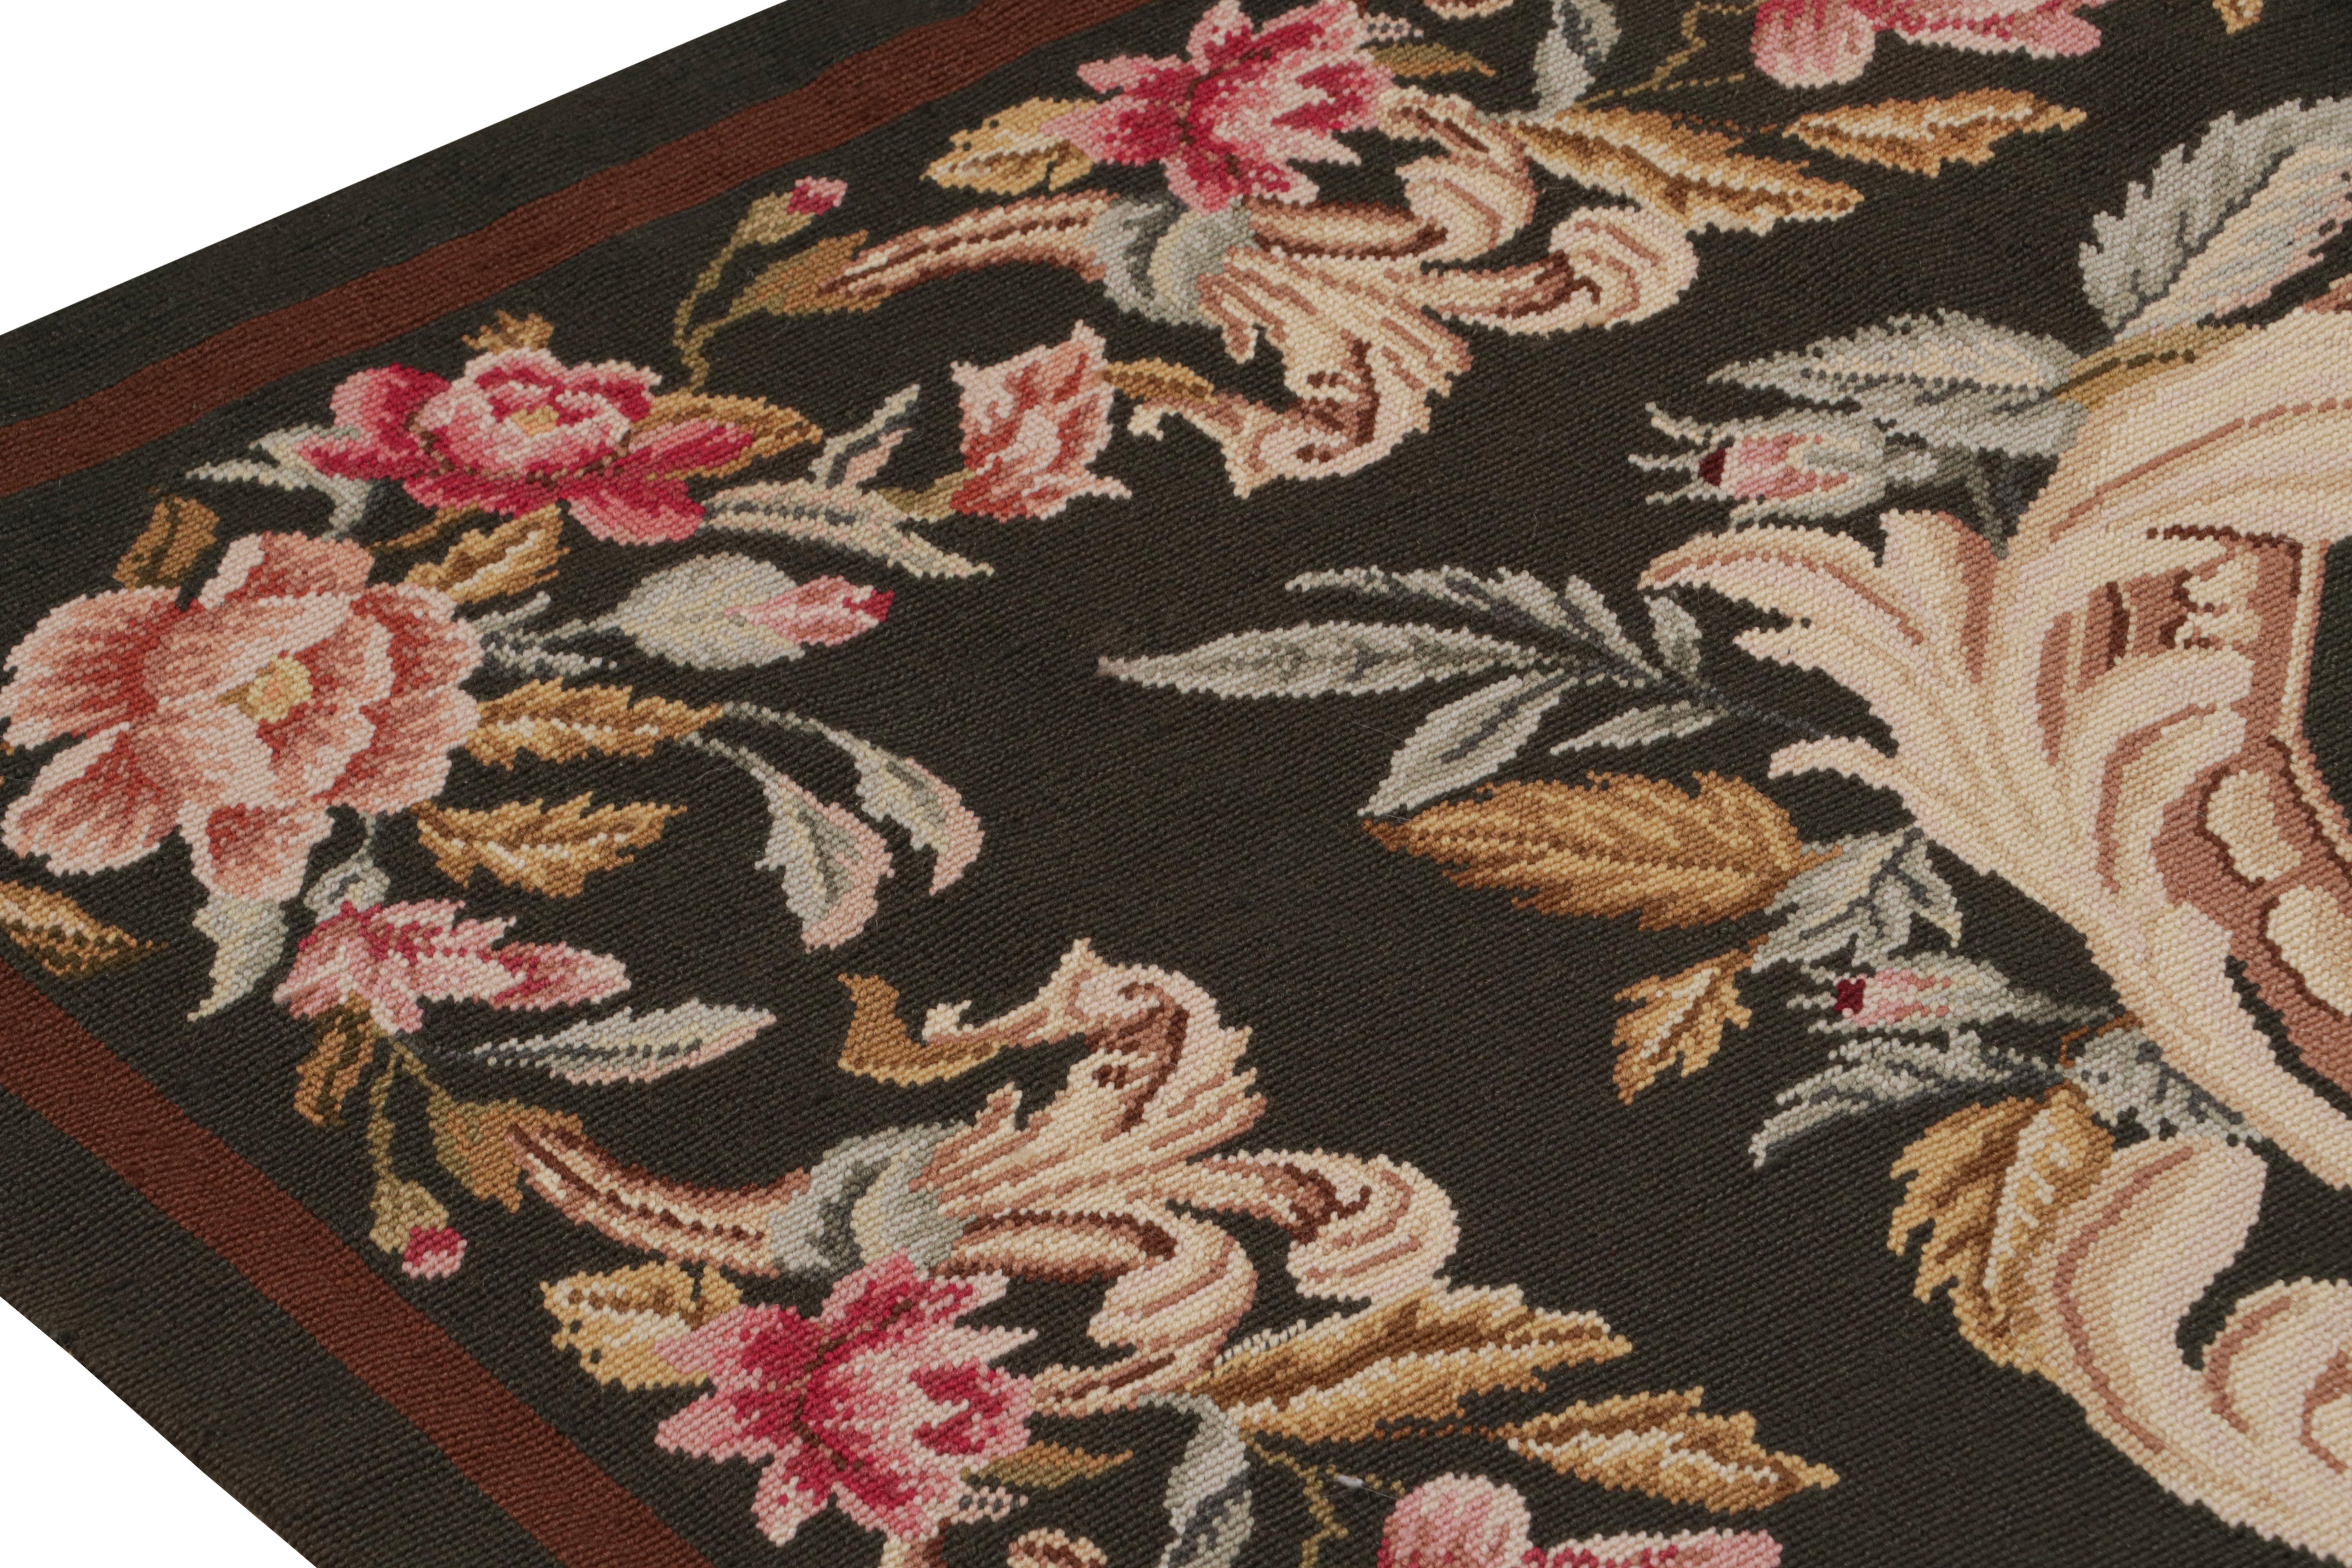 Hand-Knotted Rug & Kilim’s French Needlepoint Rug in Rich Brown With All-Over Floral Patterns For Sale